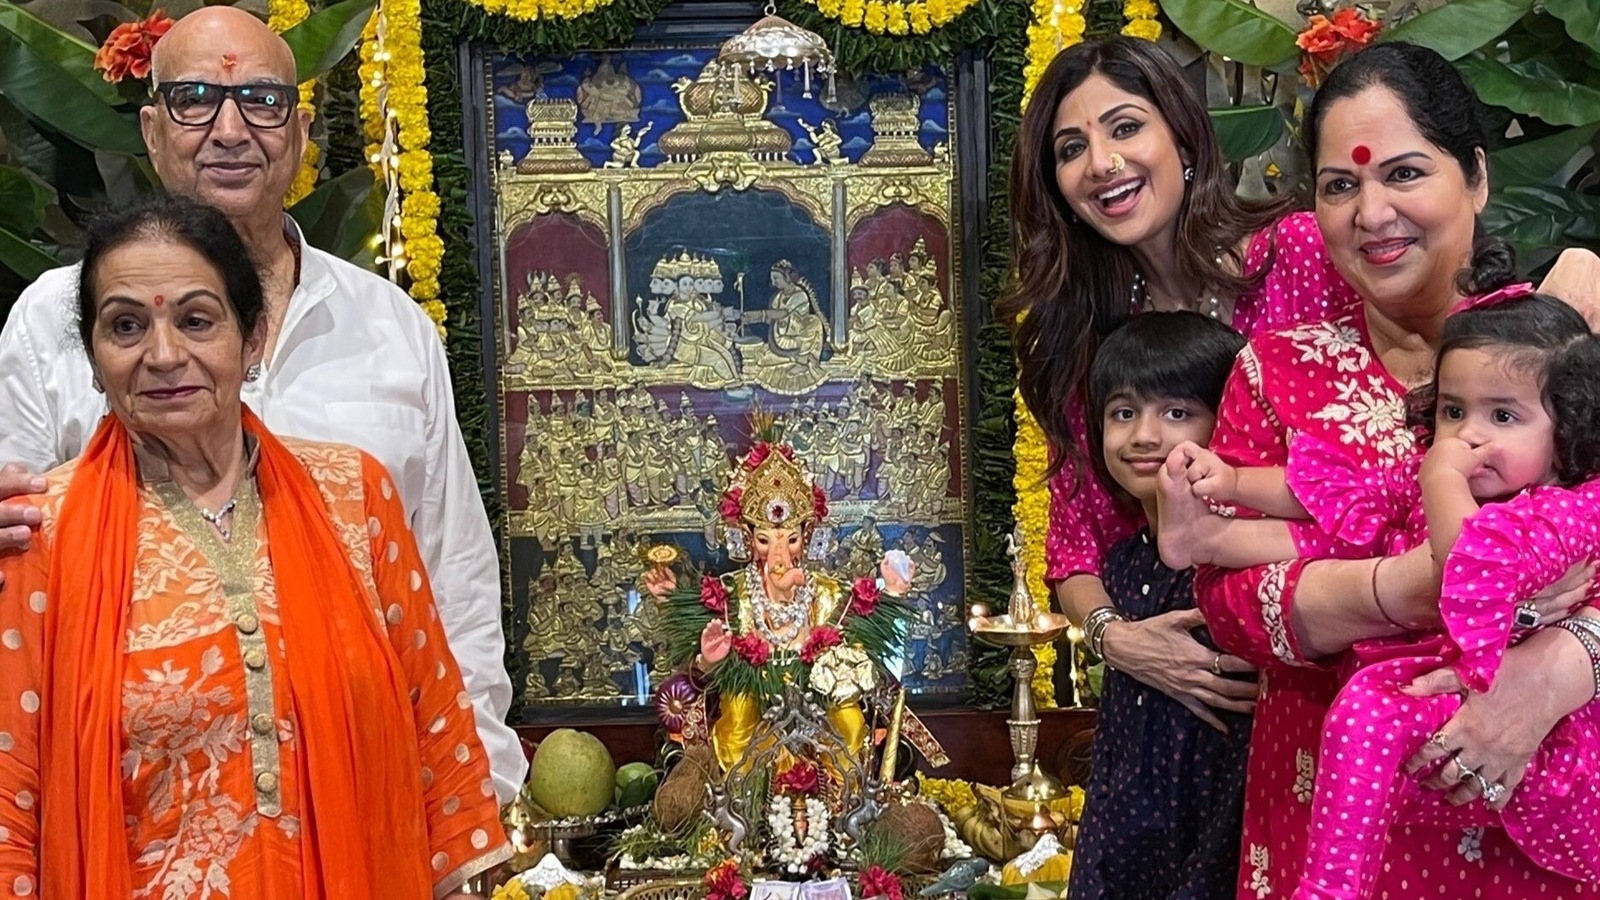 Shilpa Shetty shares pic with kids, mom, in-laws; dedicates post to grandparents: ‘They are best kind of grown-ups’